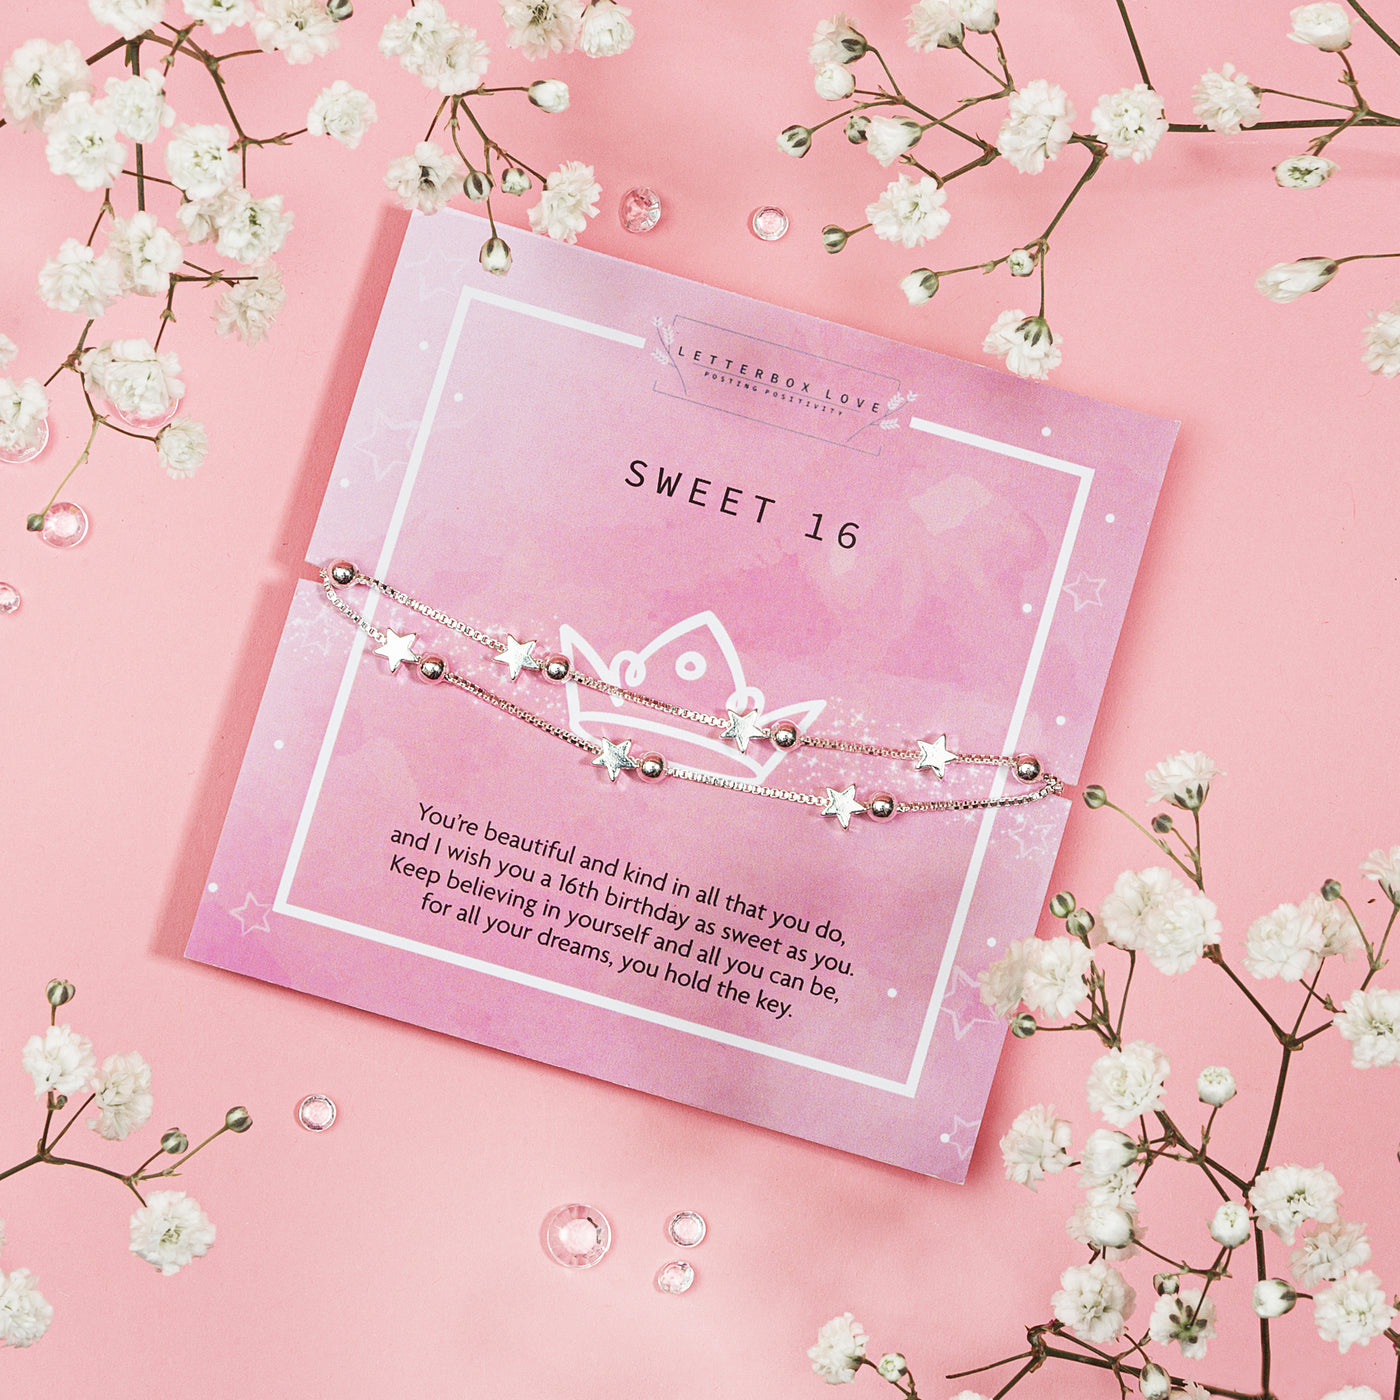 SWEET 16' bracelet adorned with star charms and delicate beads, presented on a lavender card with an encouraging message for a 16th birthday. 